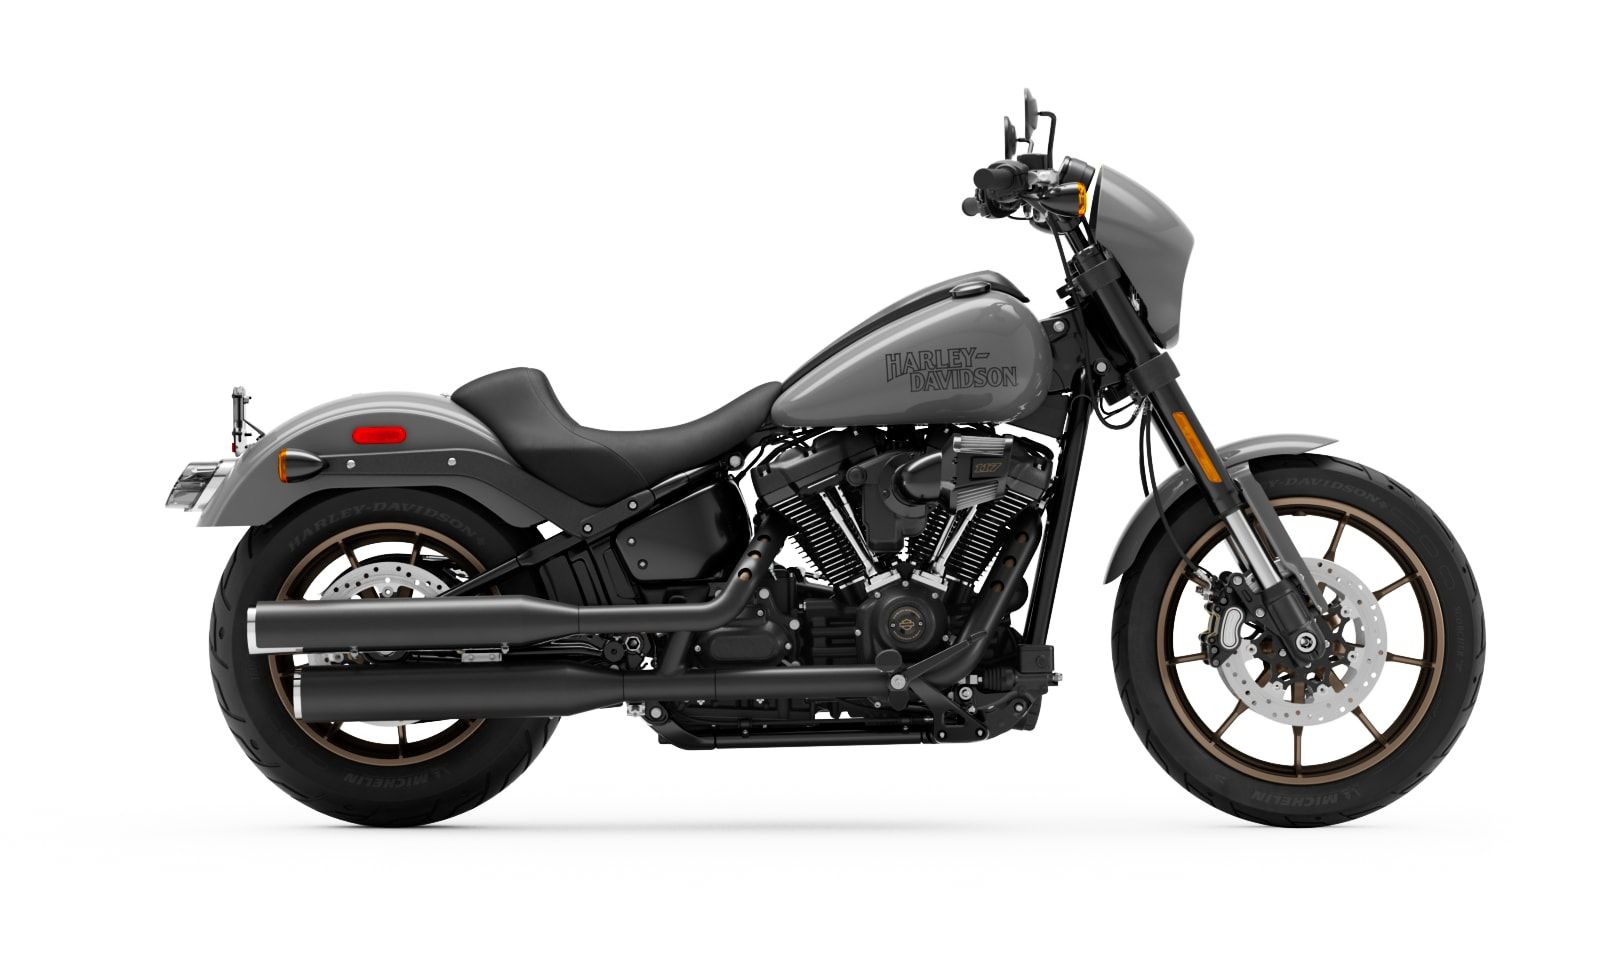 2022 Harley-Davidson Low Rider S in New London, Connecticut - Photo 1